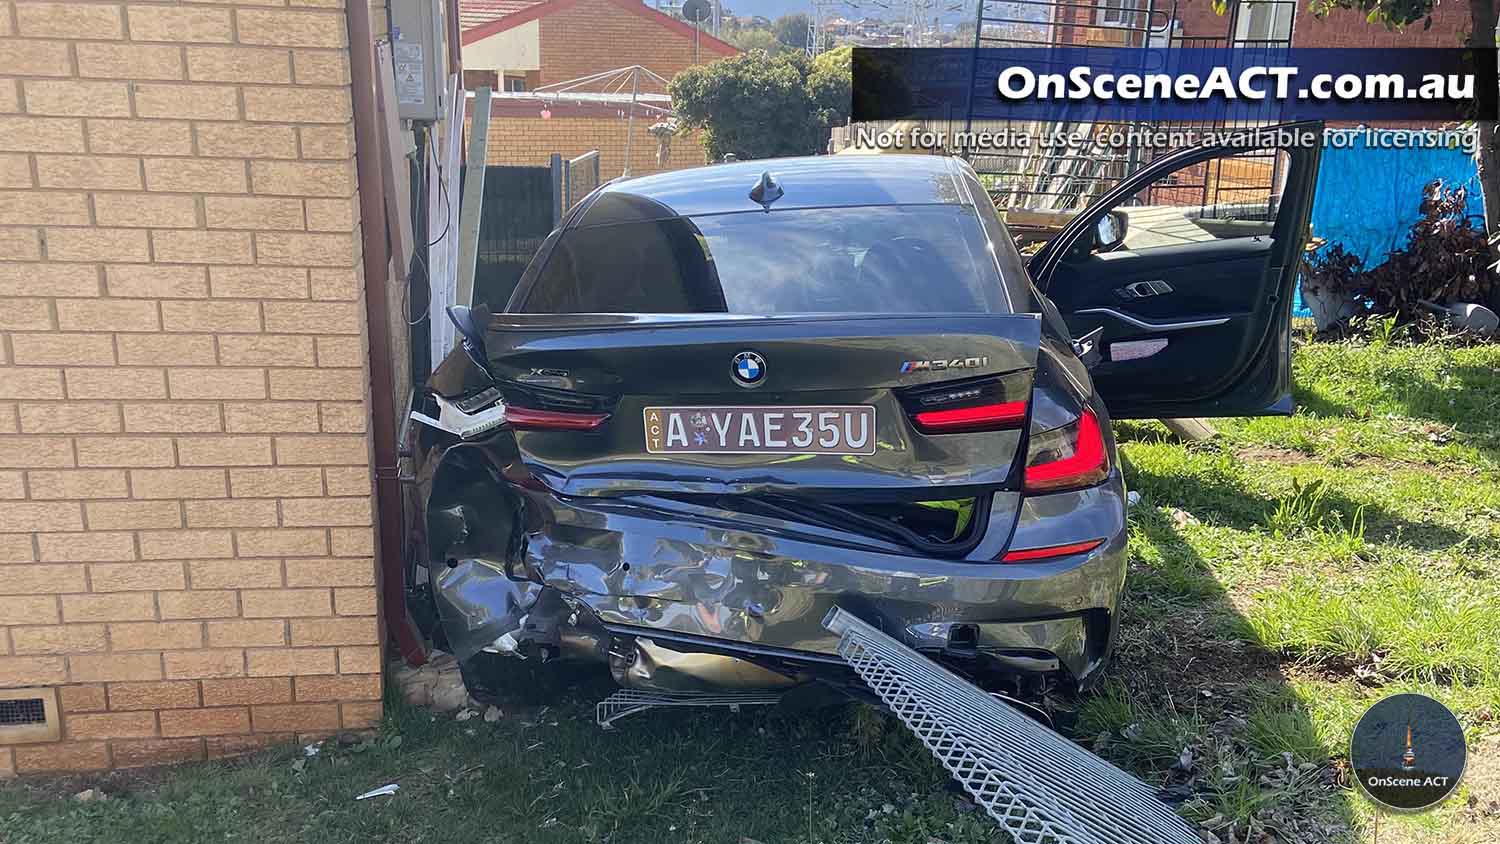 Police car crashes into home following pursuit in Karabar, NSW